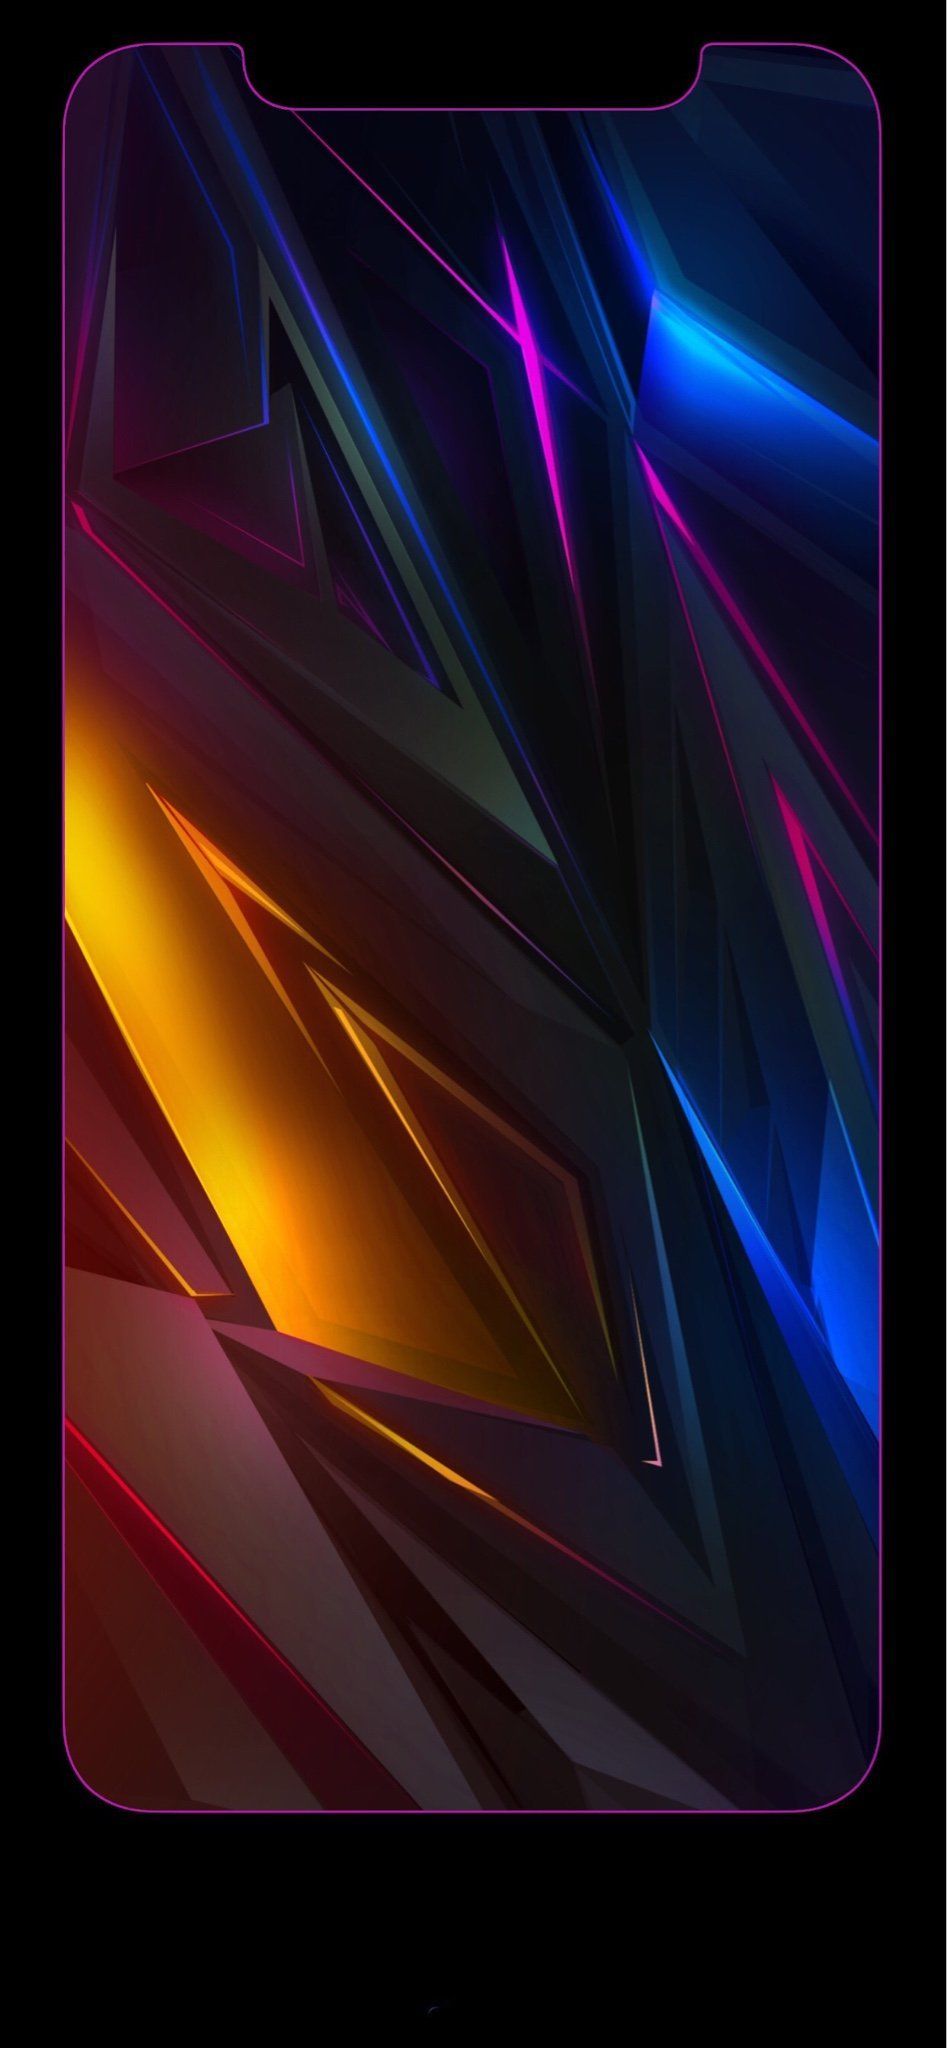 iPhone Max Wallpaper Free iPhone Max Background